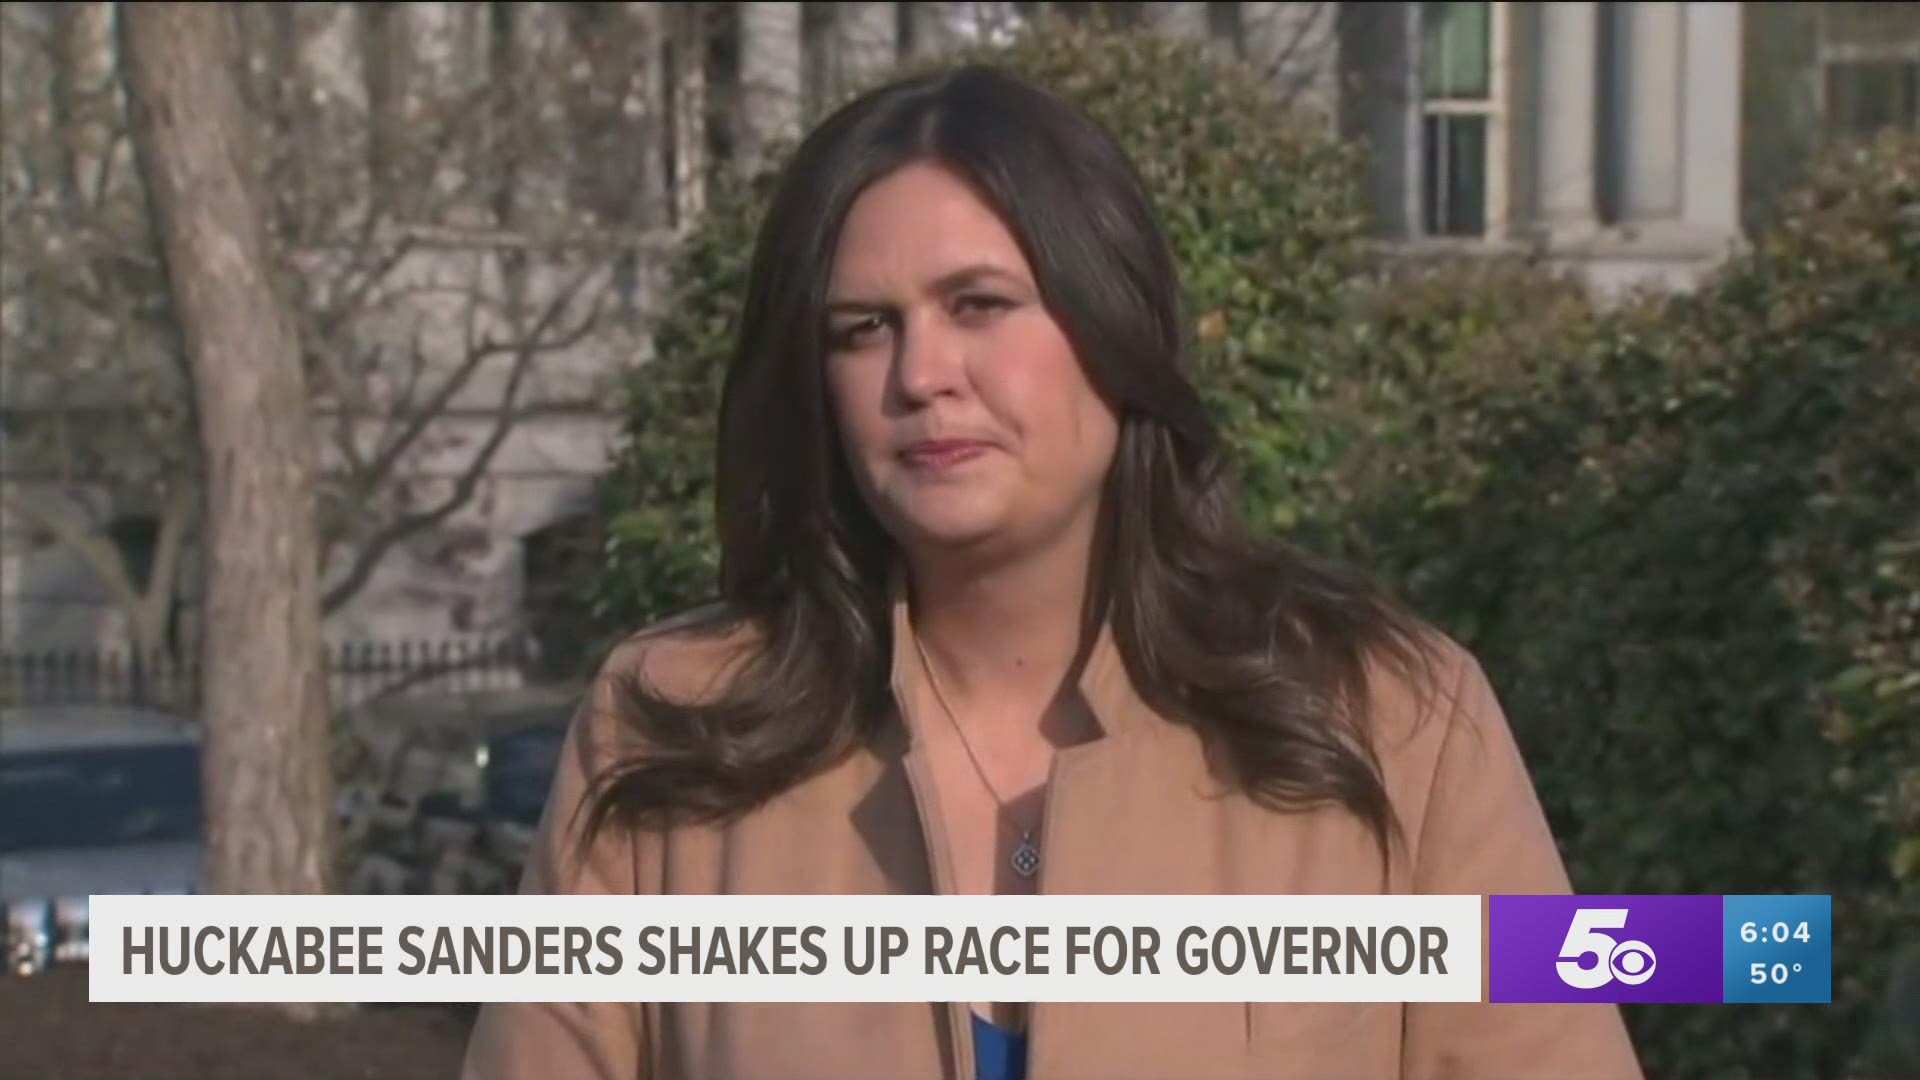 Sarah Huckabee Sanders has officially announced she's running for governor of Arkansas. She joins Attorney General Leslie Rutledge and Lt. Governor Tim Griffin.